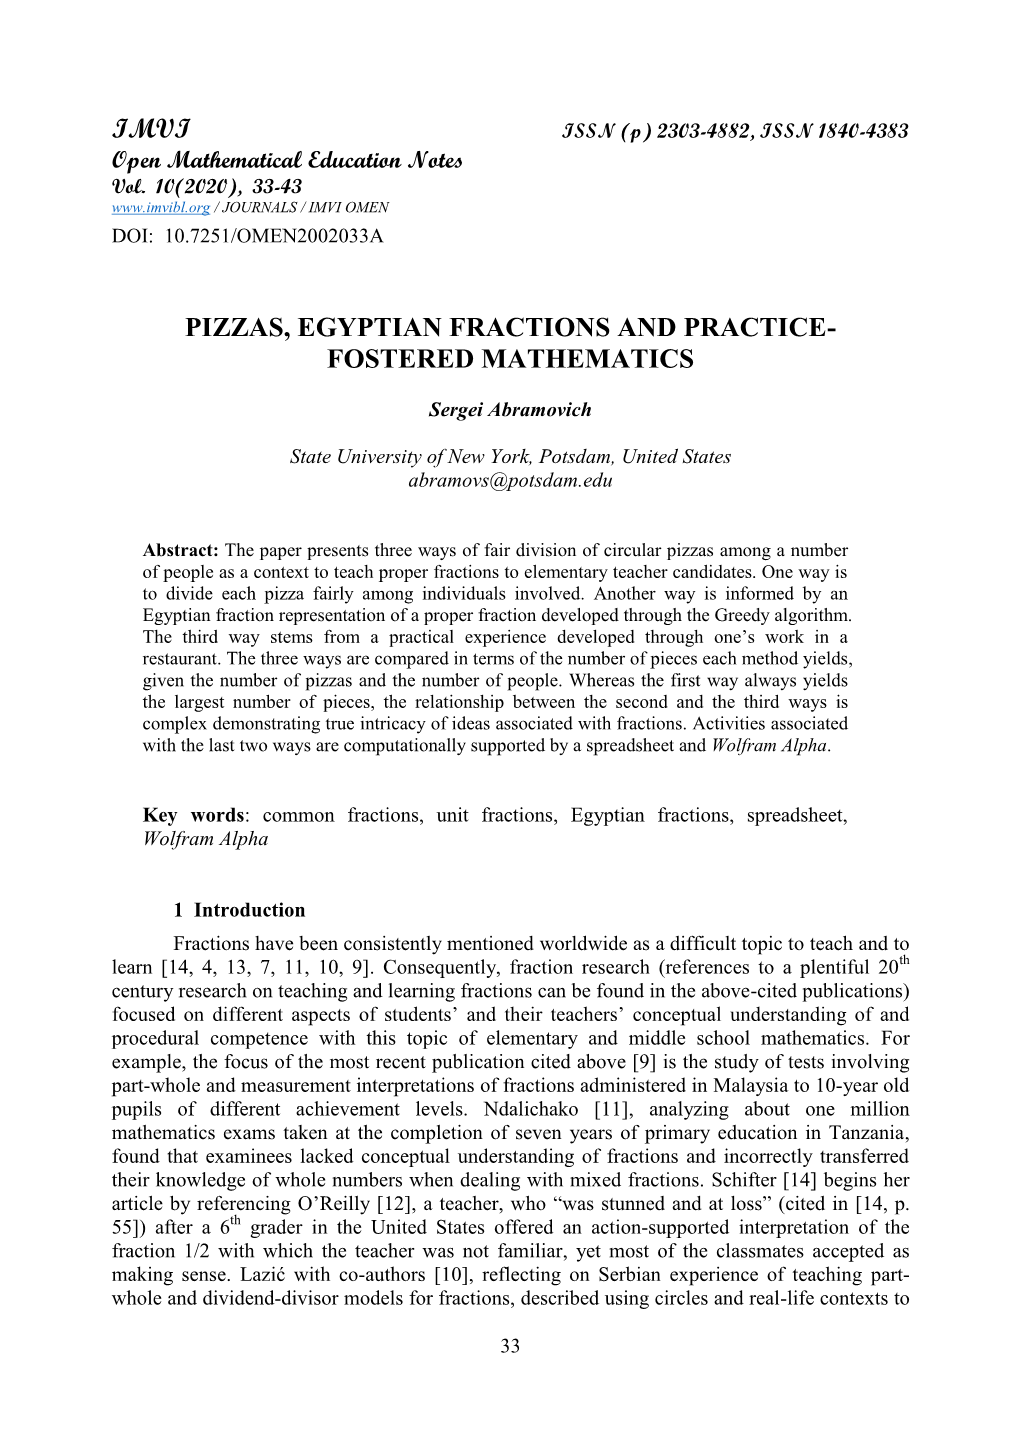 Pizzas, Egyptian Fractions and Practice-Fostered Mathematics